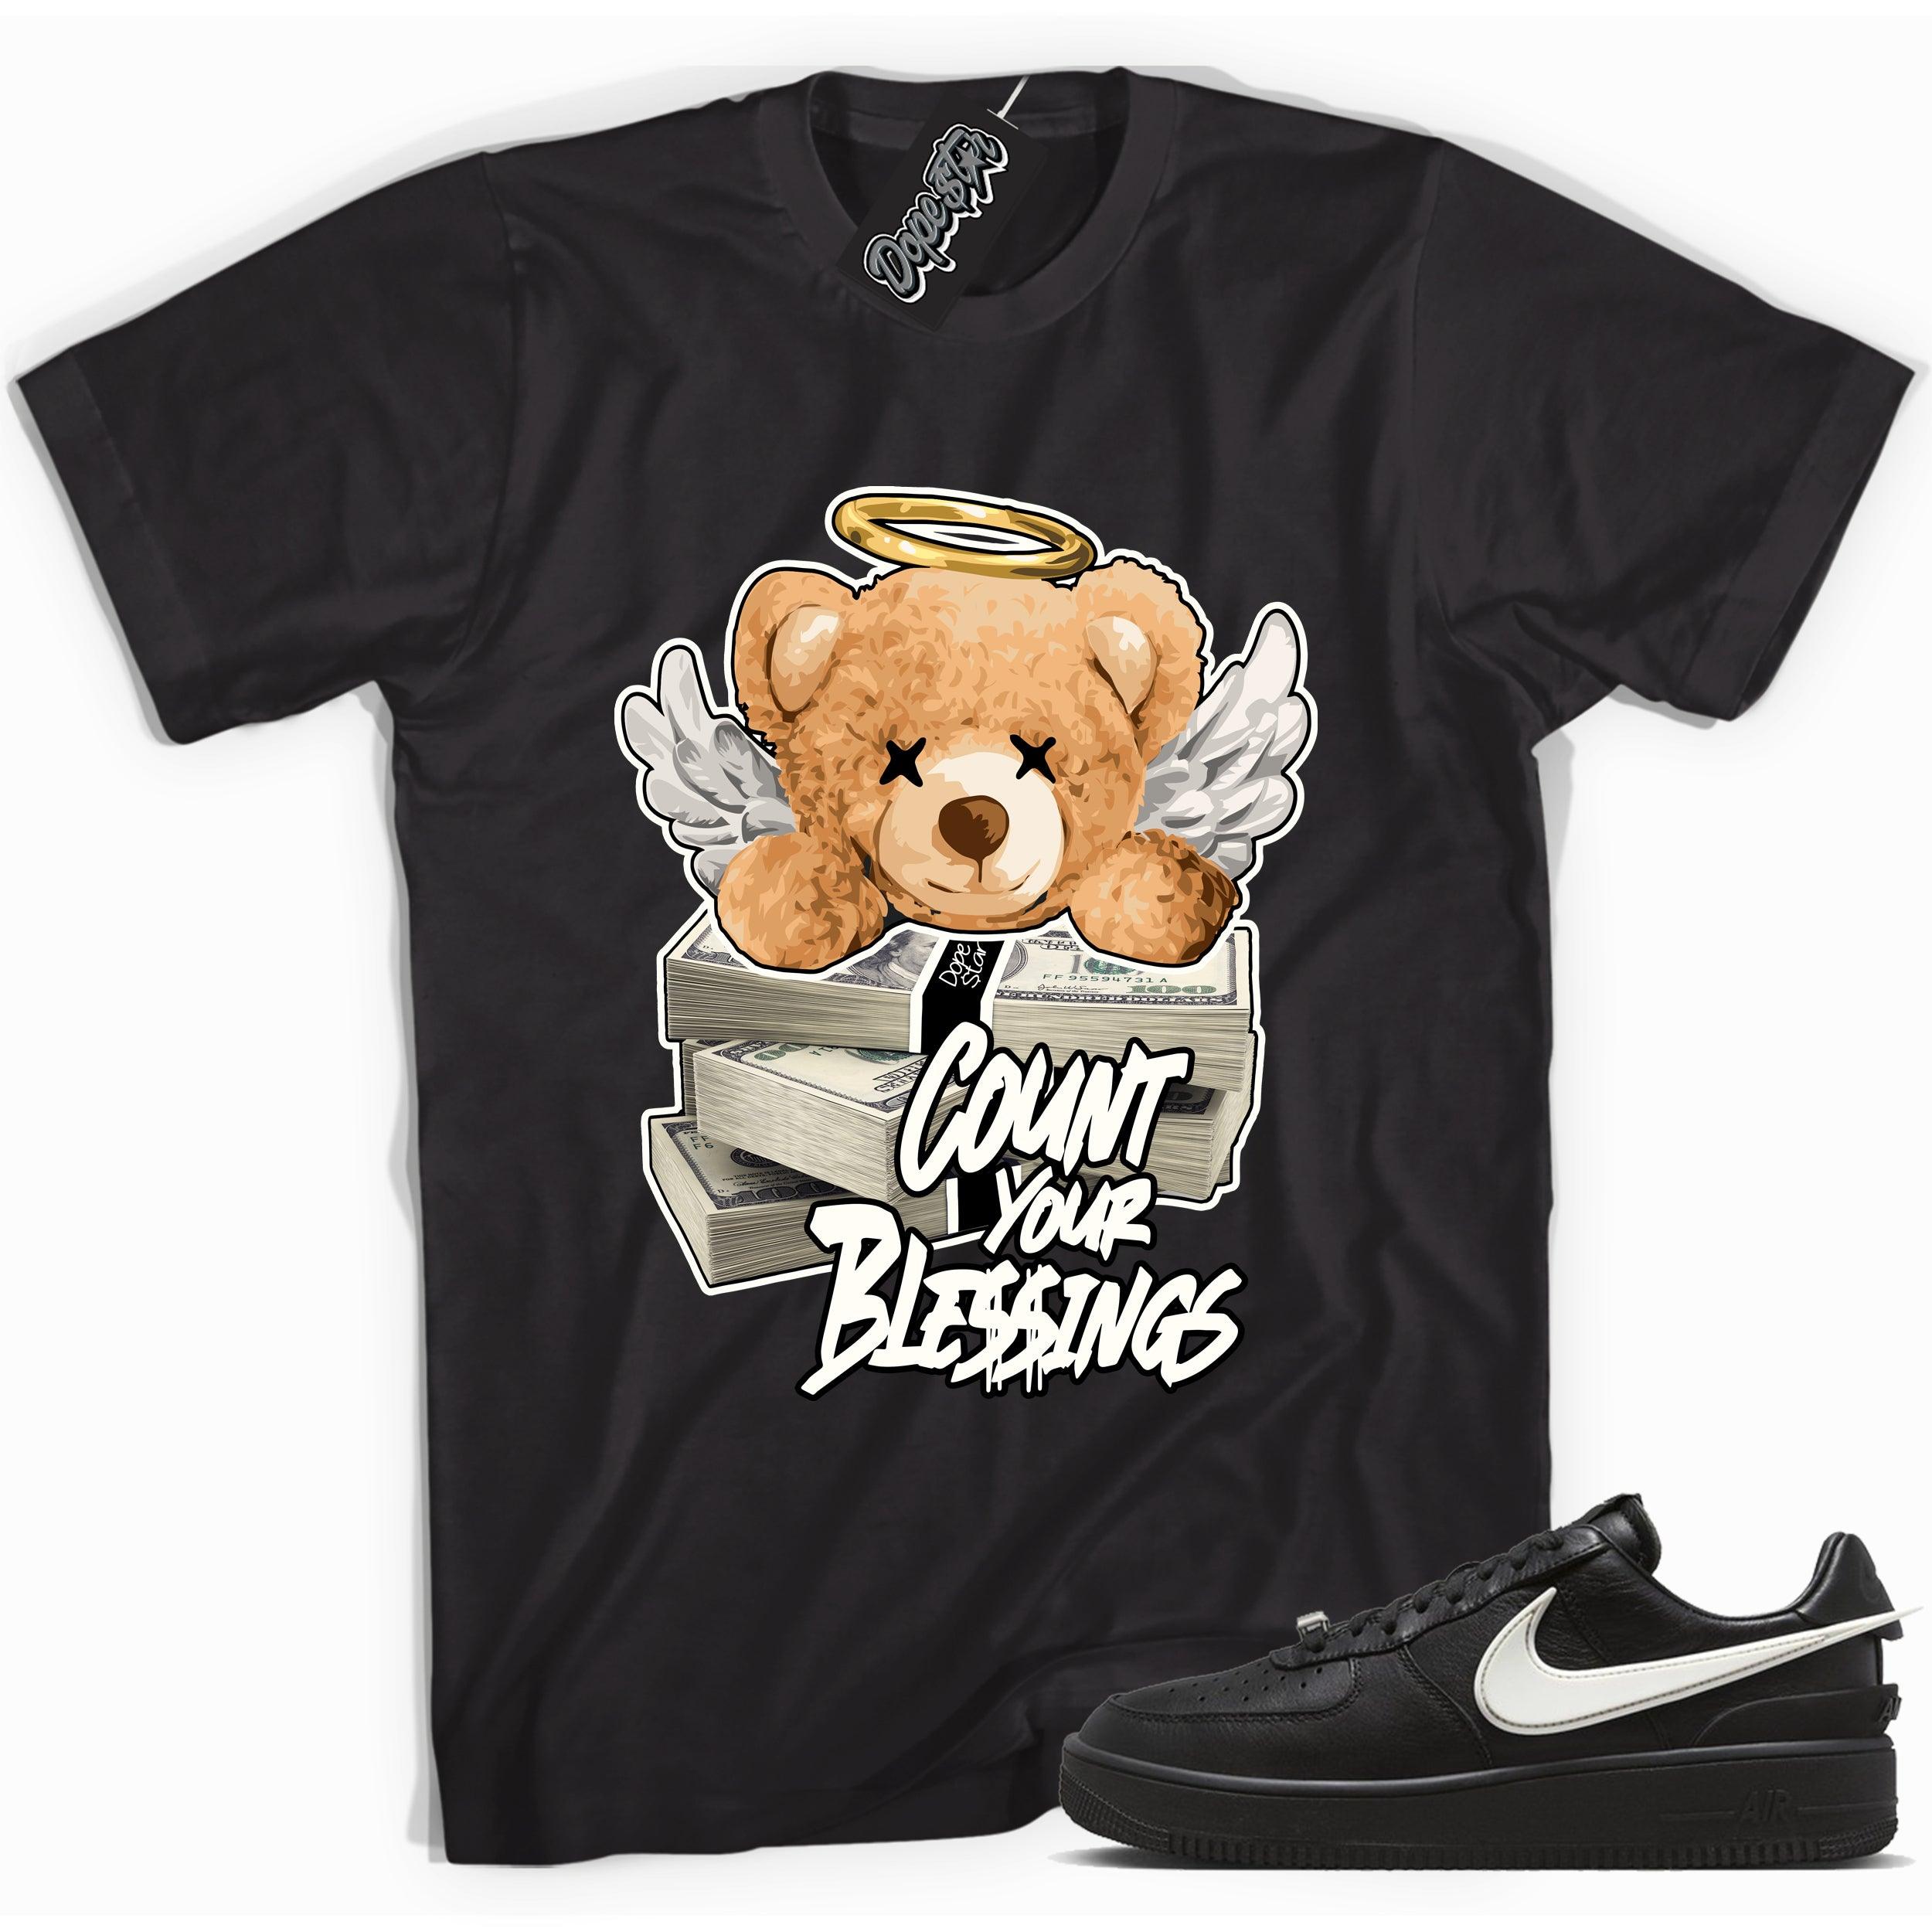 Cool black graphic tee with 'count your blessings' print, that perfectly matches Nike Air Force 1 Low SP Ambush Phantom sneakers.